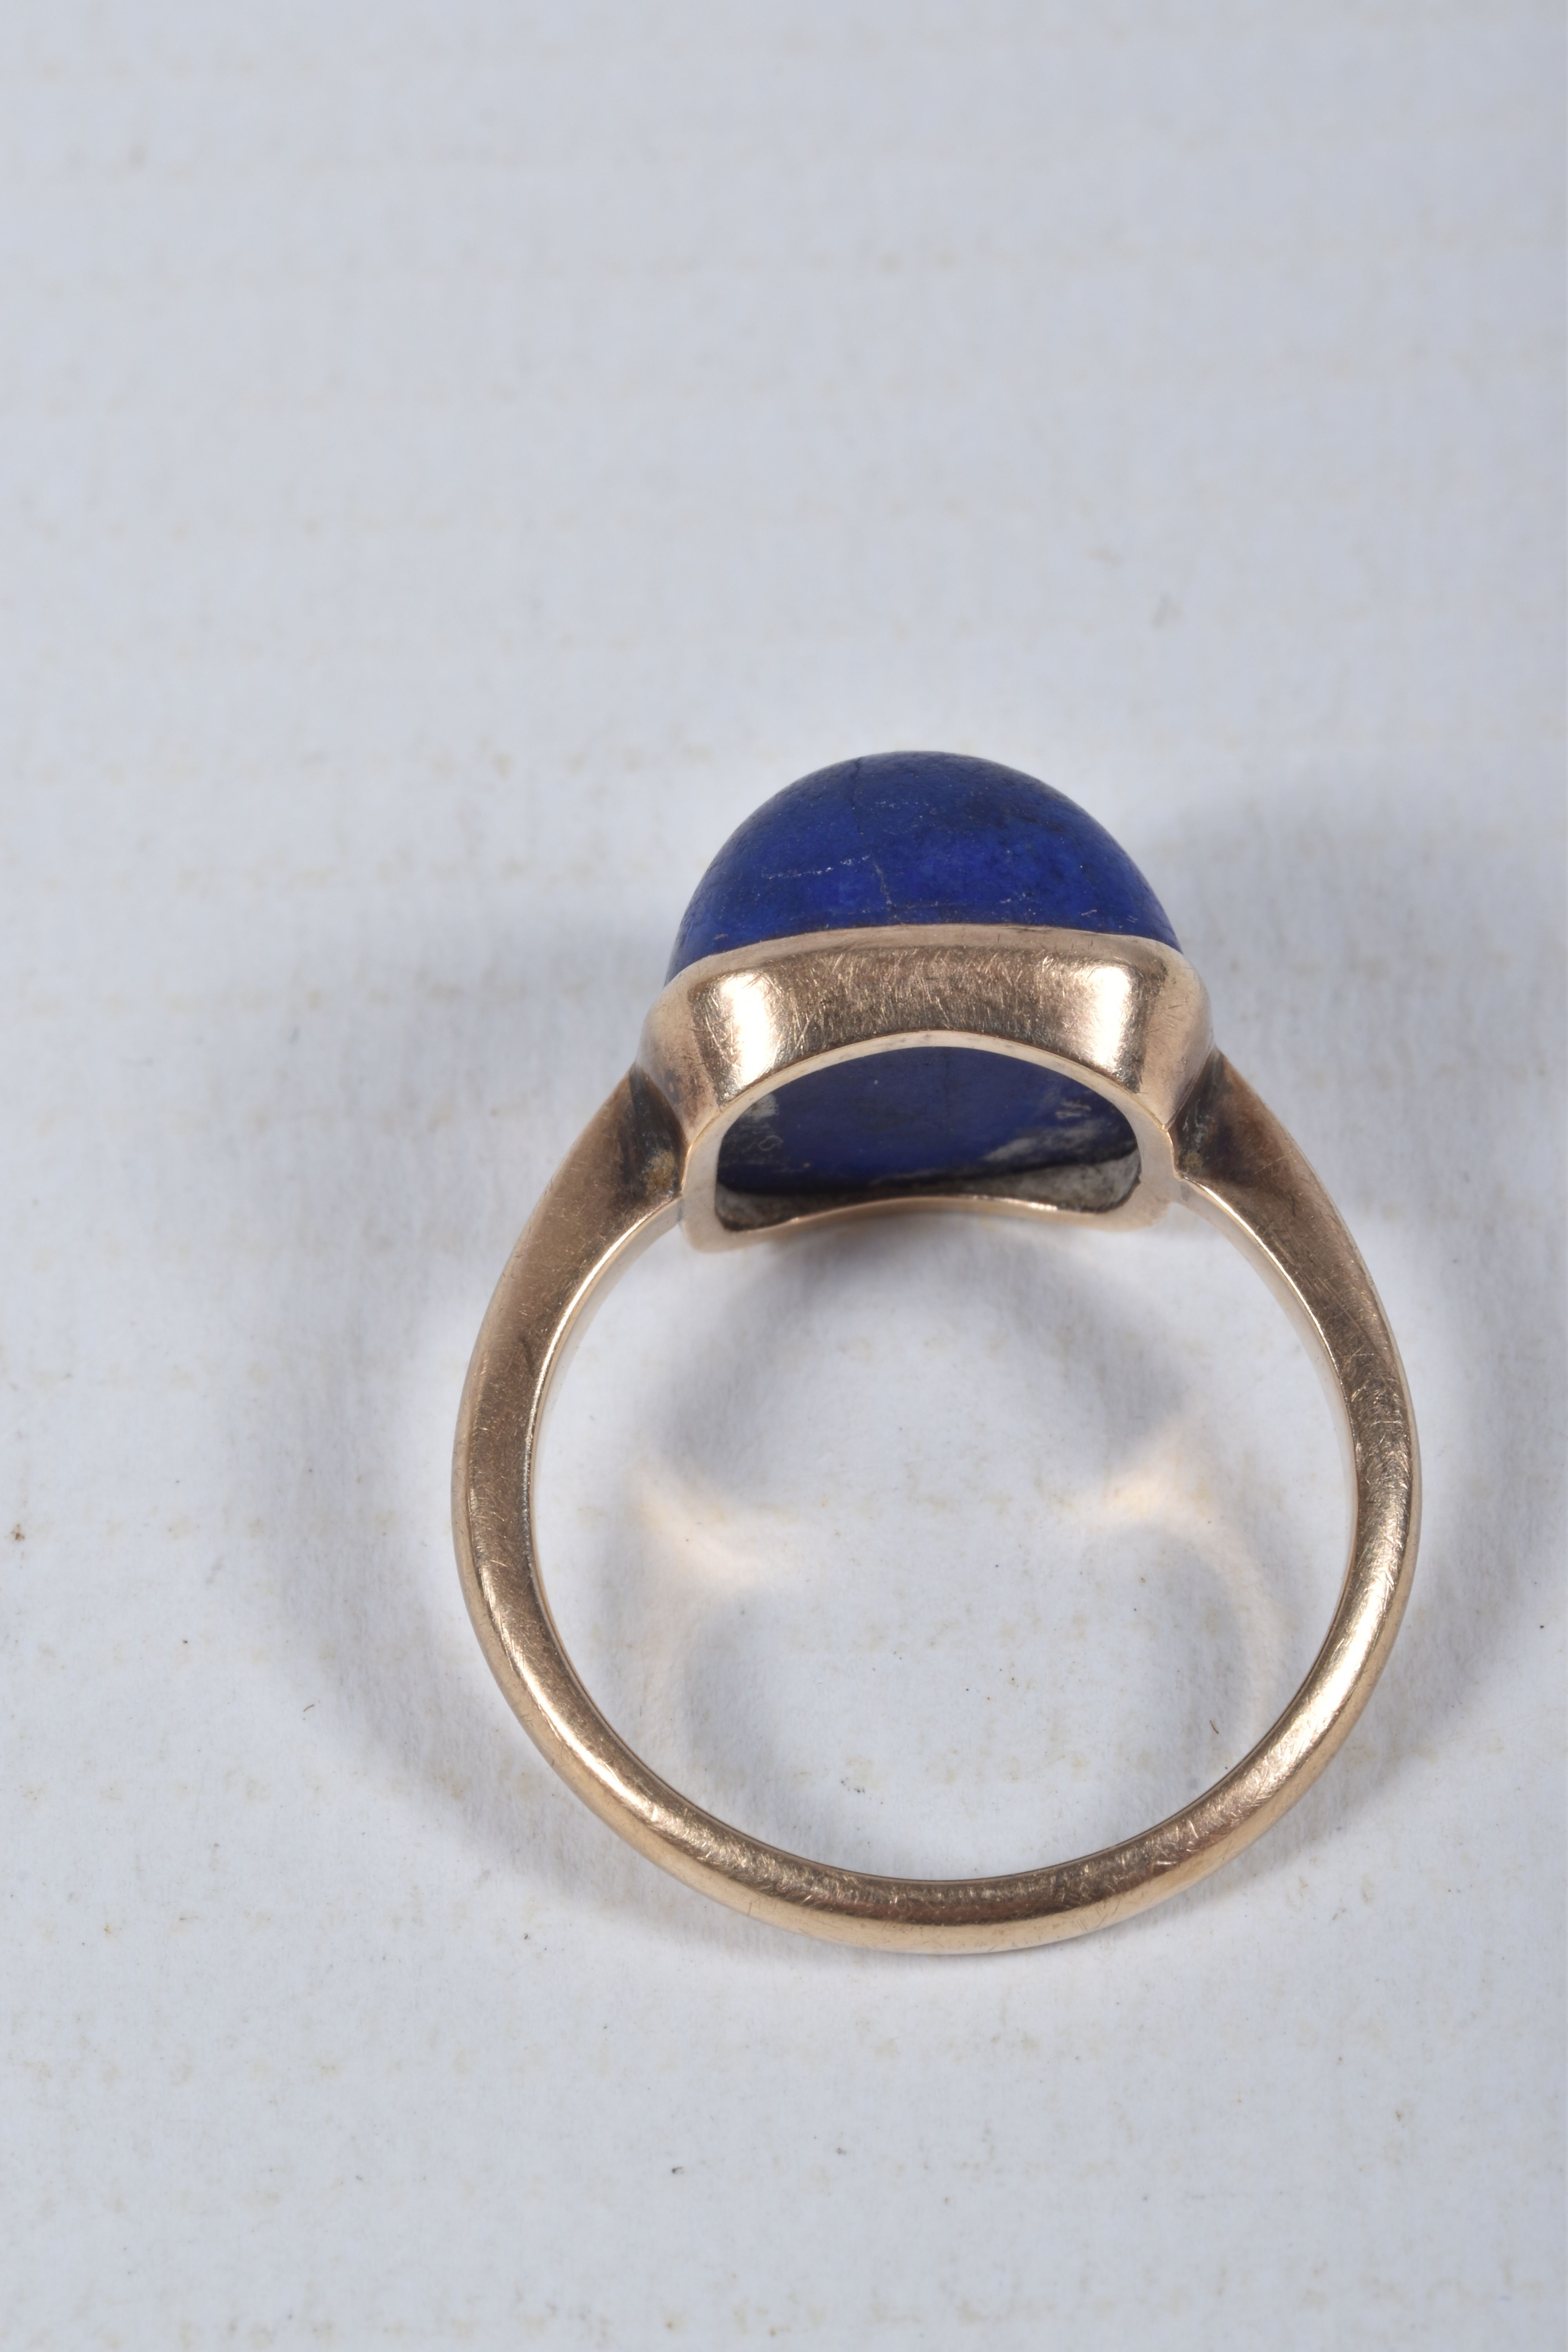 A LAPIS LAZULI RING, designed as a square lapis lazuli cabochon in a collet setting to the plain - Image 4 of 4